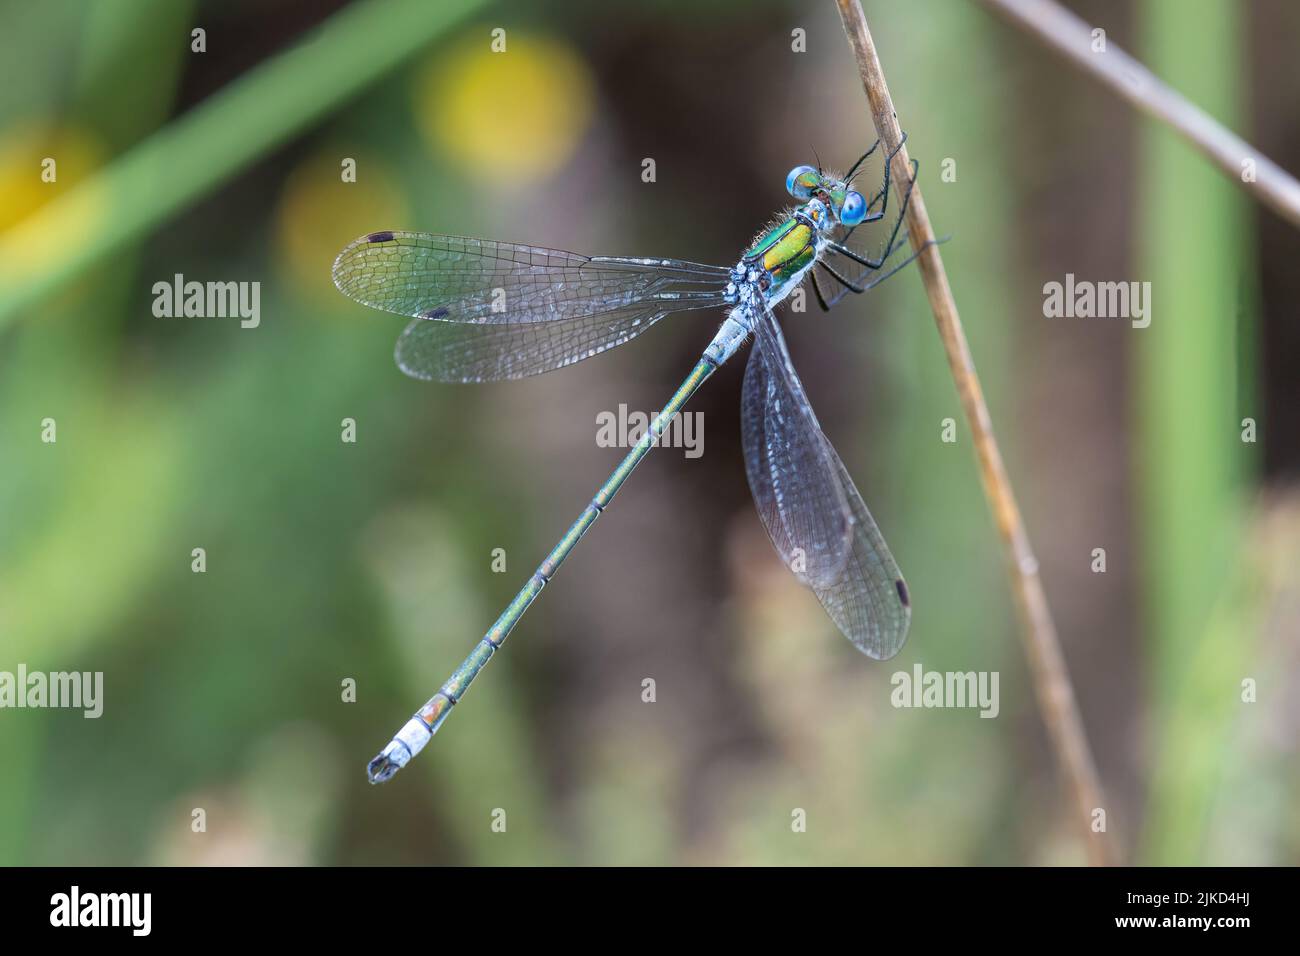 Emerald damselfly (Lestes sponsors), Angleterre, Royaume-Uni Banque D'Images